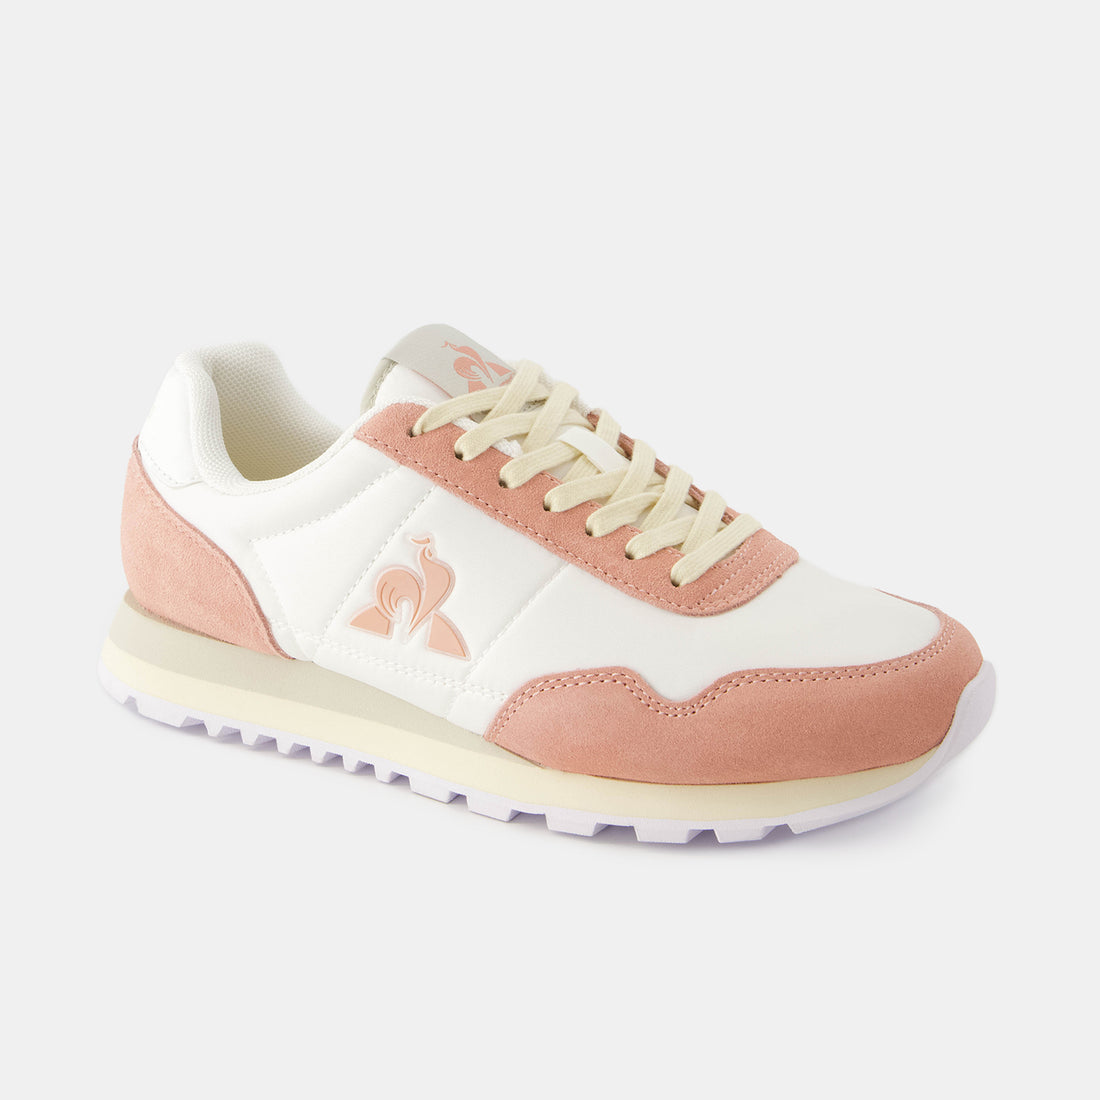 2410505-ASTRA_2 W optical white/ rose tan | Chaussures ASTRA_2 W Femme